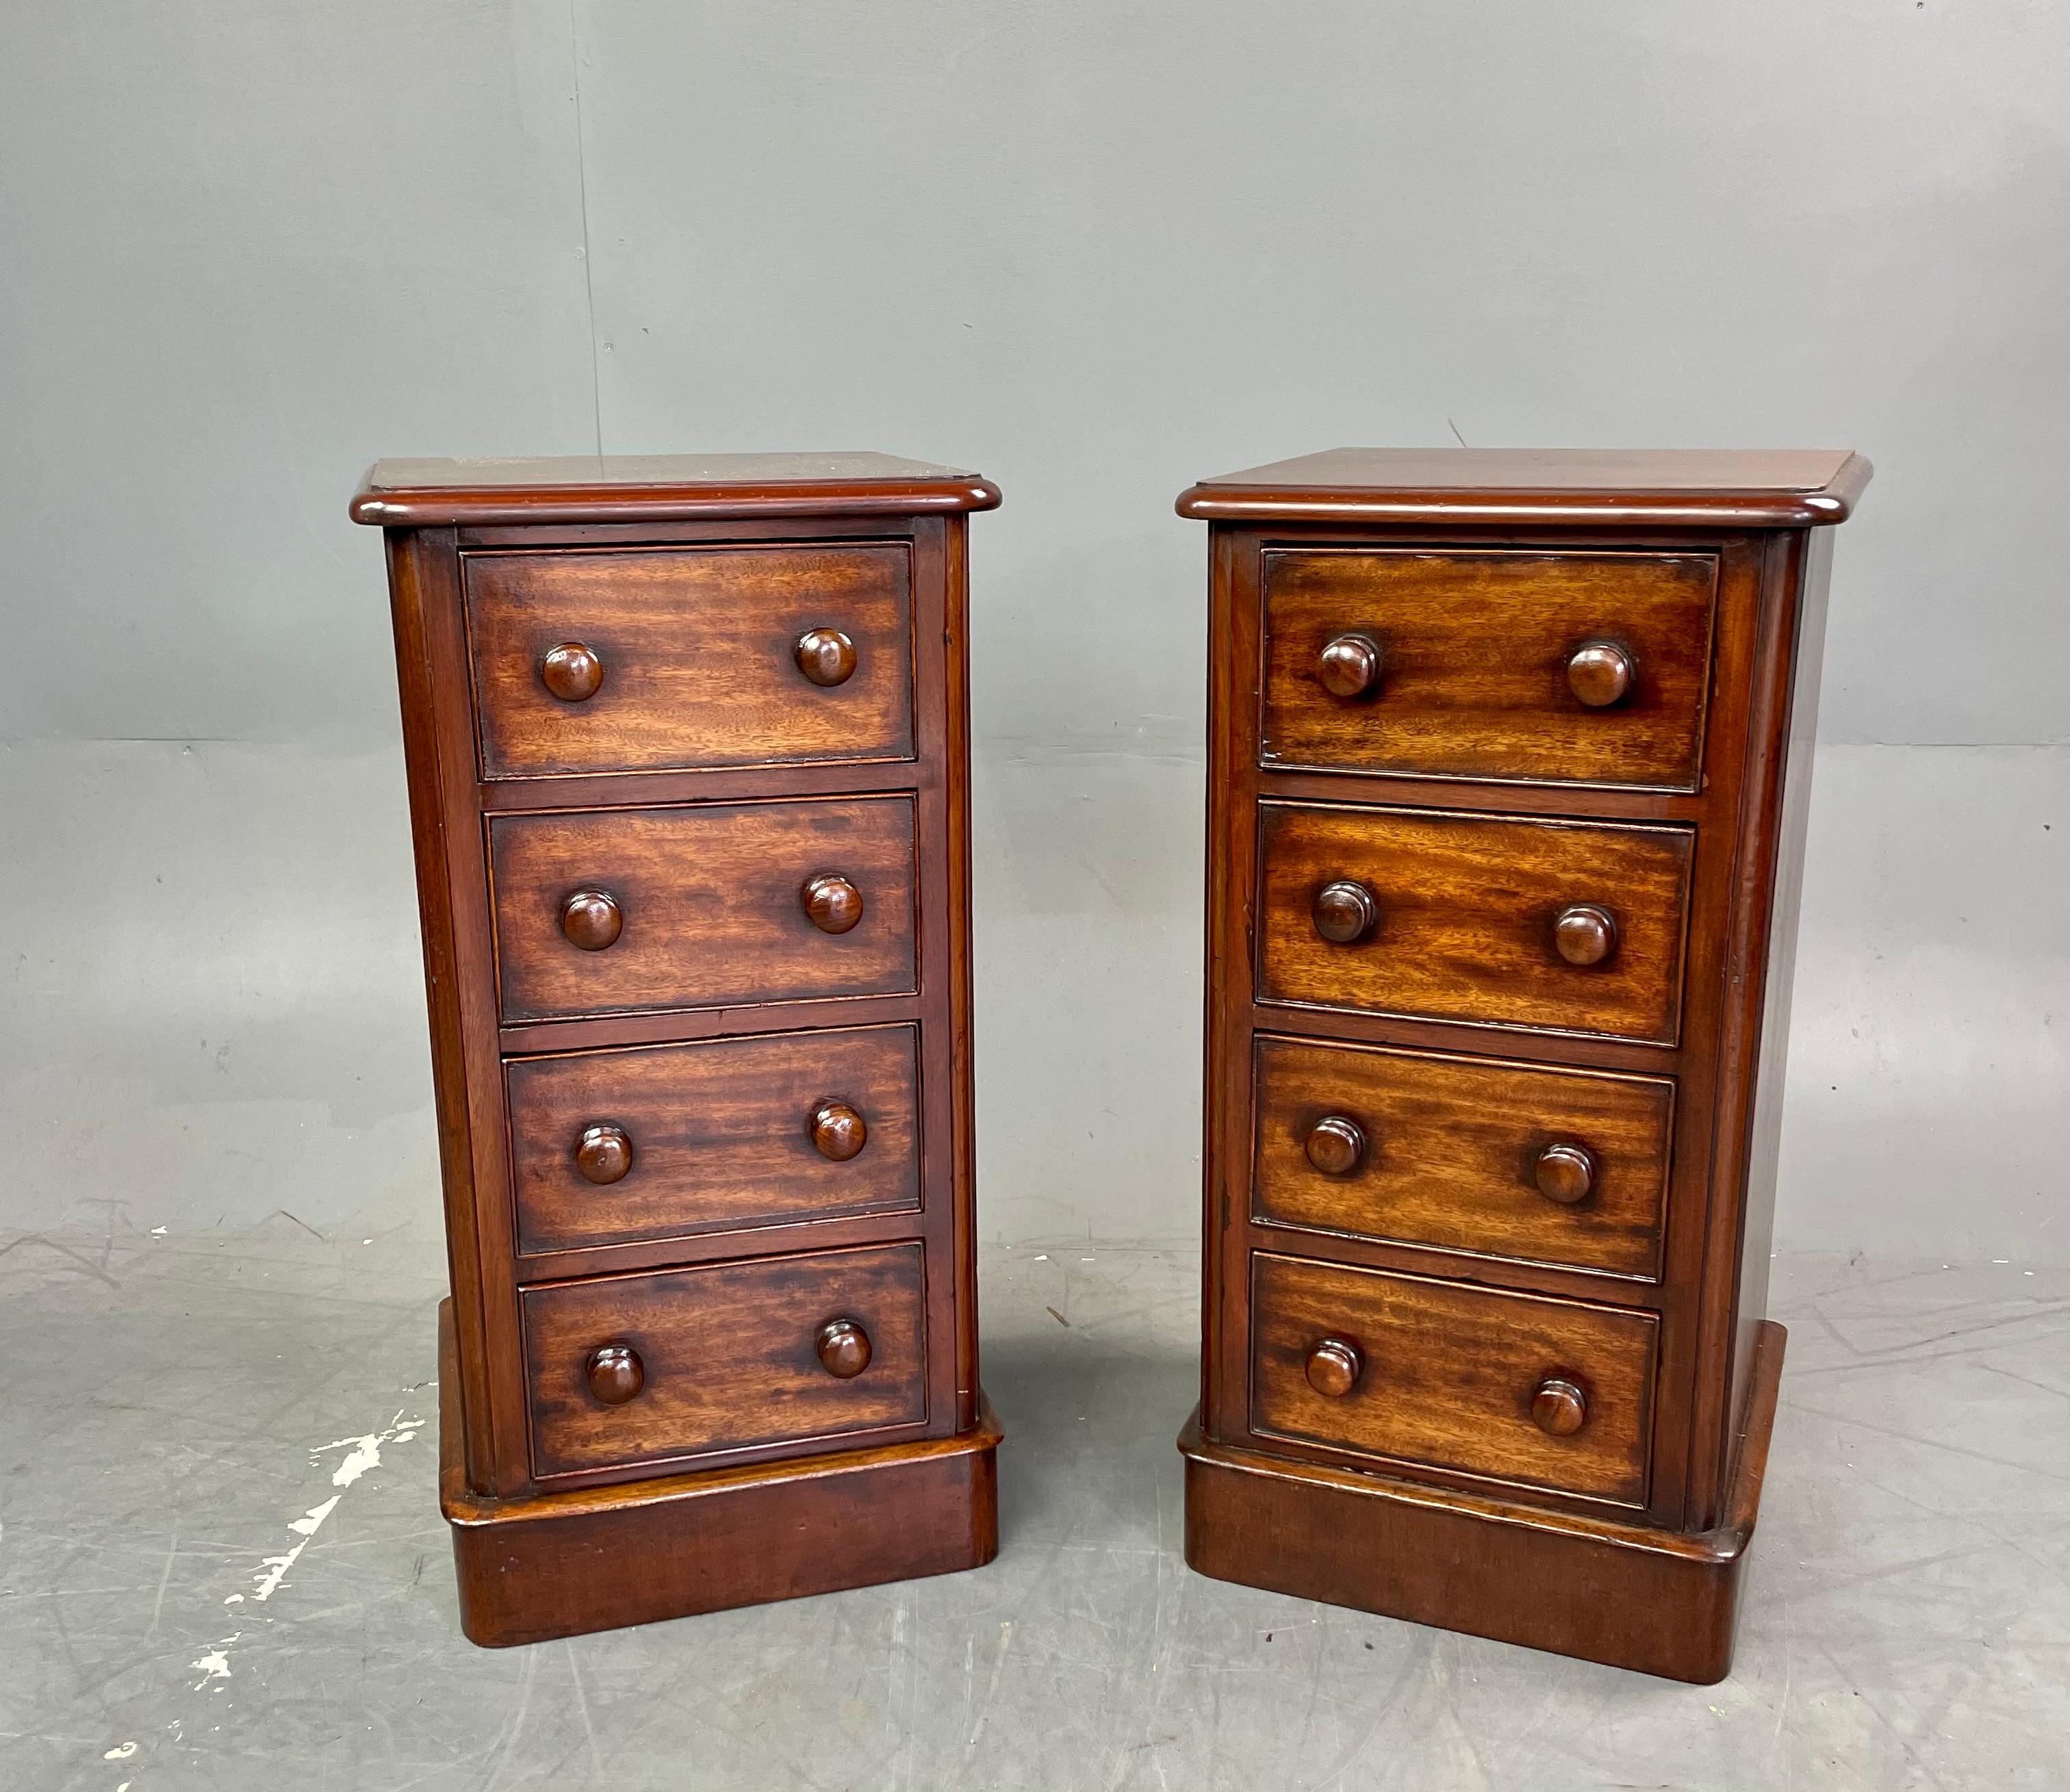 Good quality pair of Victorian mahogany bedside chests circa 1880 .
The chests are very well proportioned each with four graduating drawers that are hand dovetailed and all slide nice and smooth as they should .
They are in very good clean condition